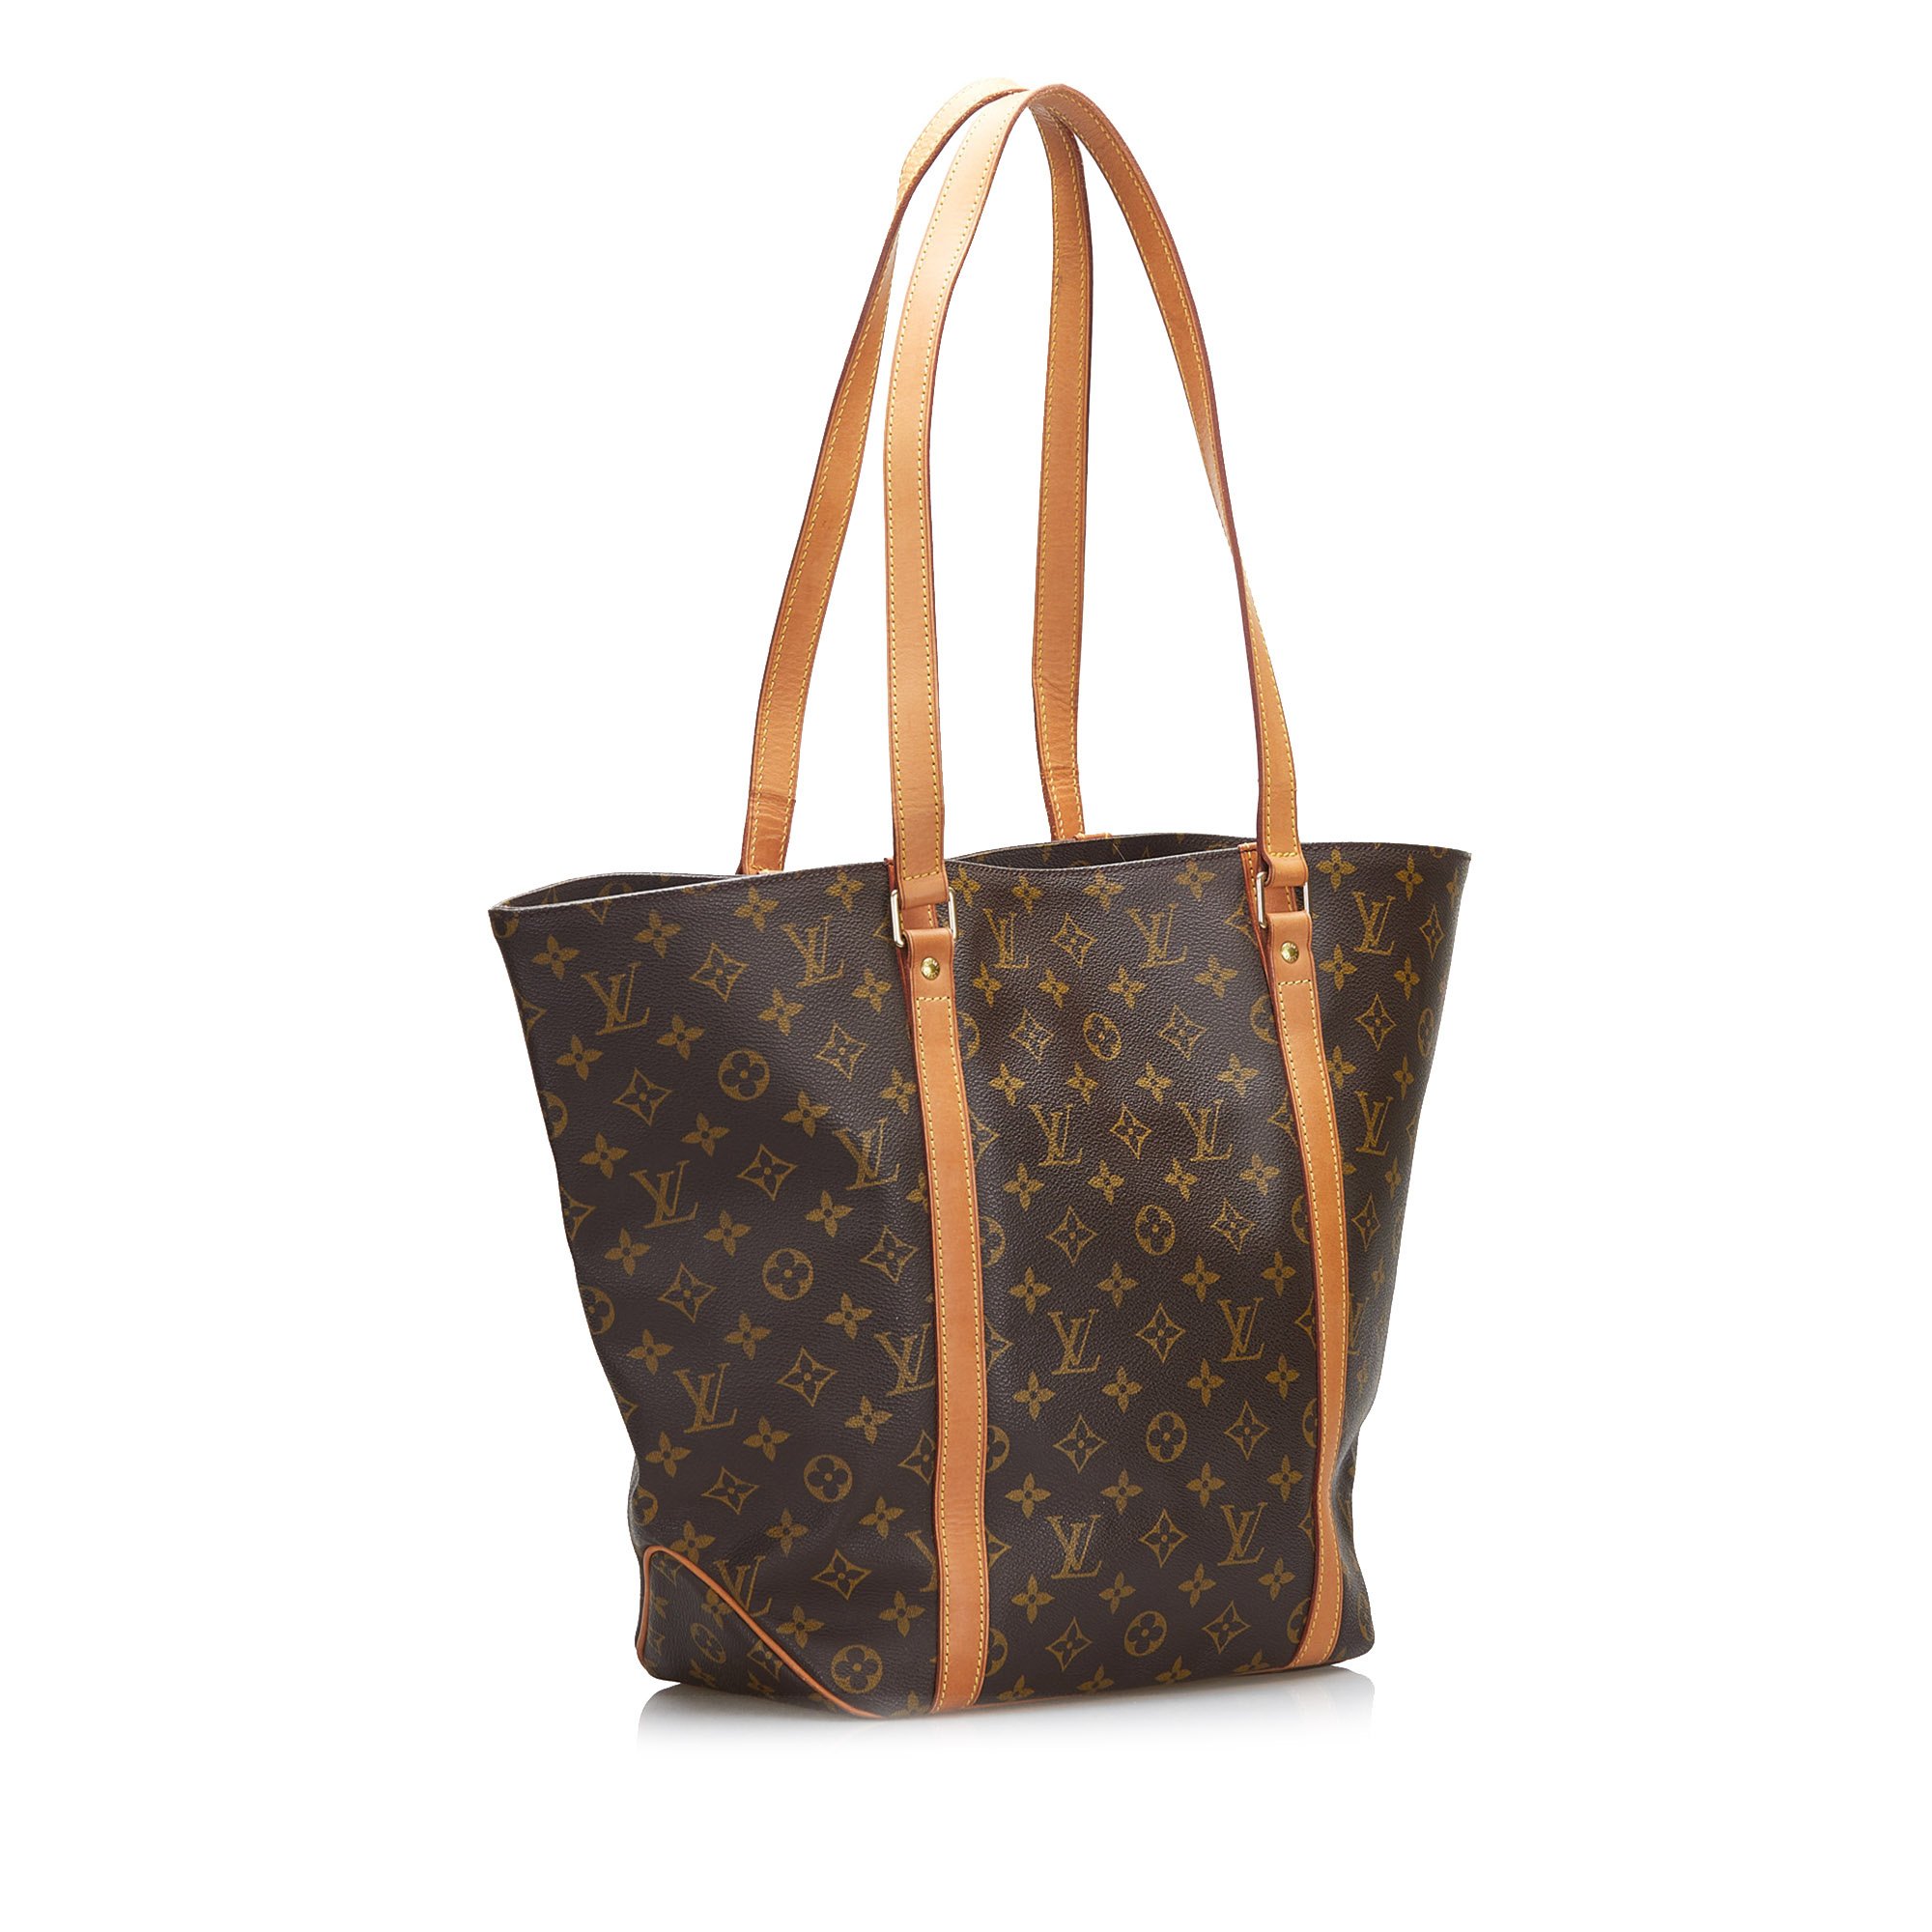 Help me choose! Does anyone own the Ellipse or Sac tote? : r/Louisvuitton